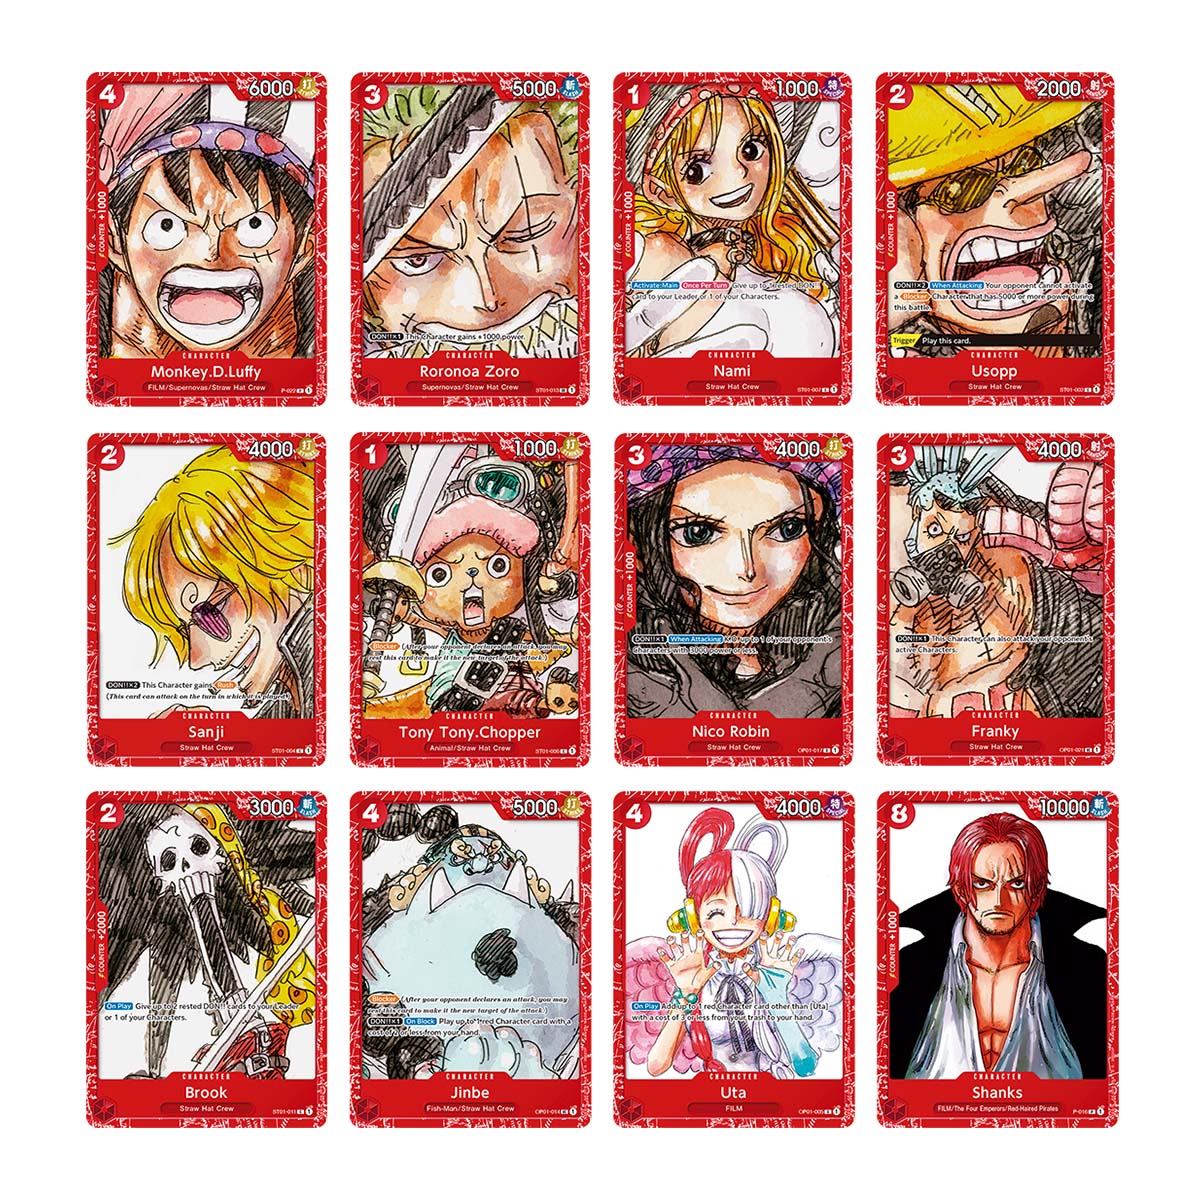 One Piece CG: Premium Card Collection One Piece Film RED Edition | Silver Goblin